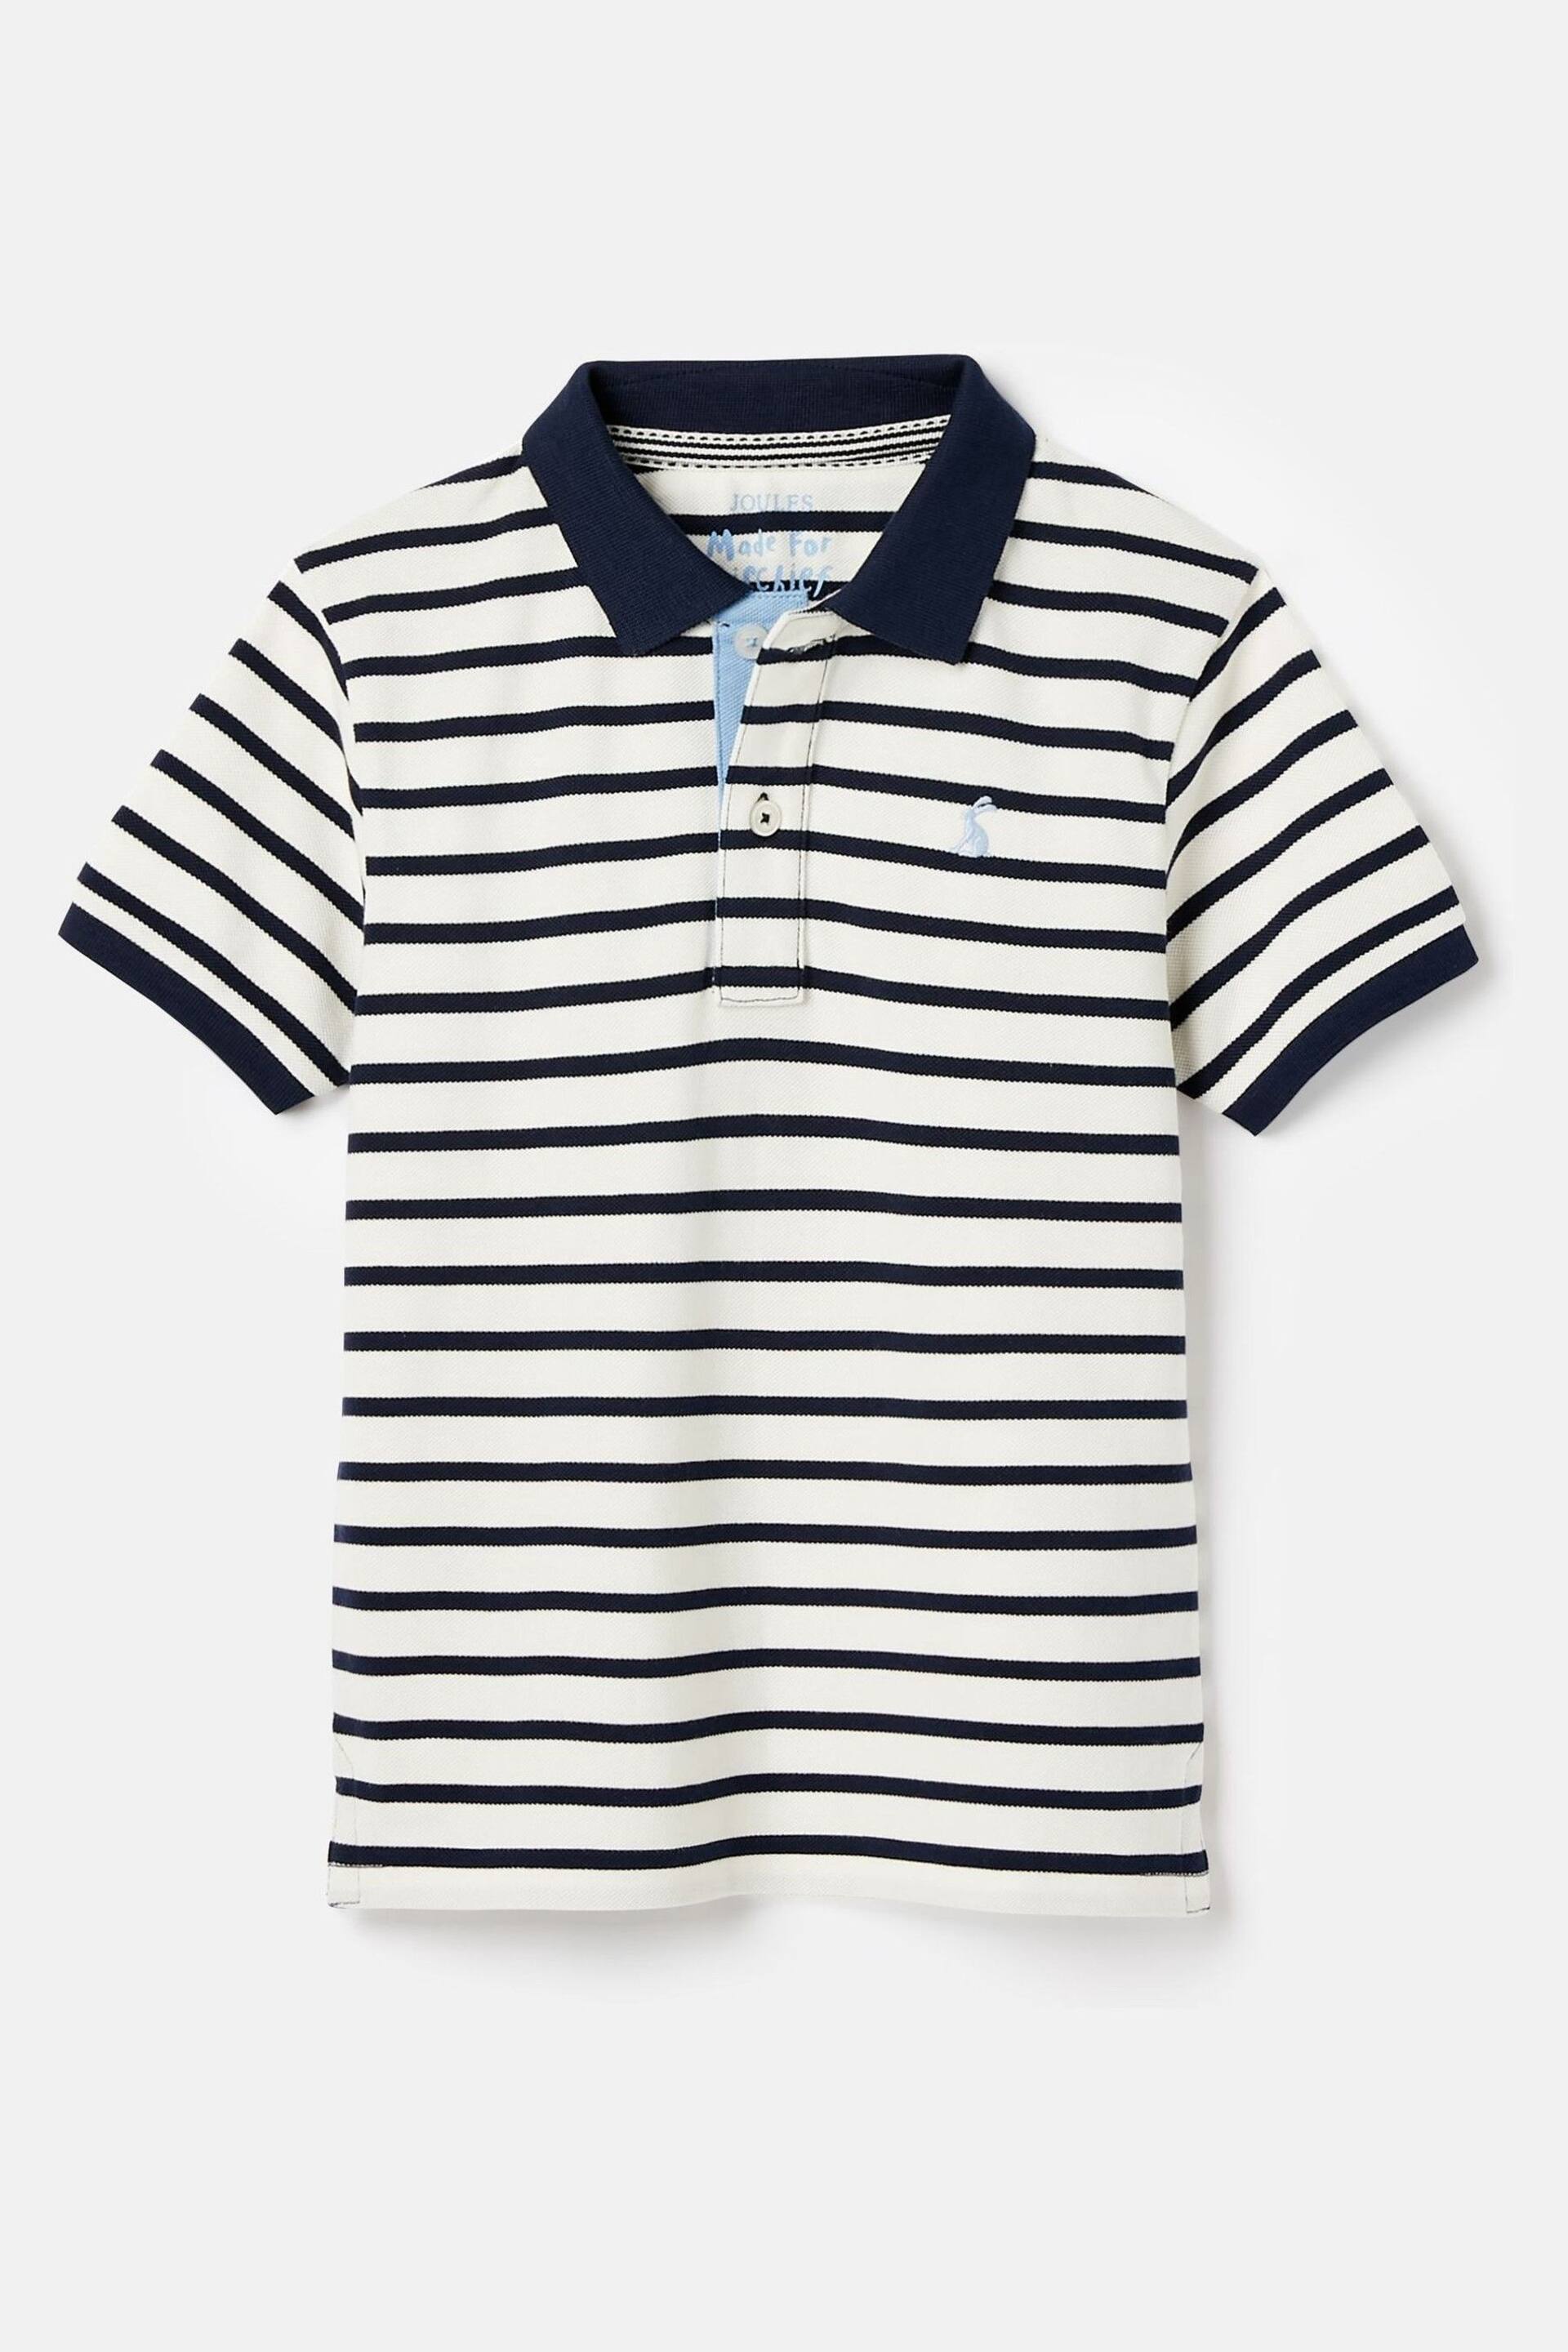 Joules Filbert Navy Blue Striped Pique Cotton Polo Shirt - Image 1 of 5